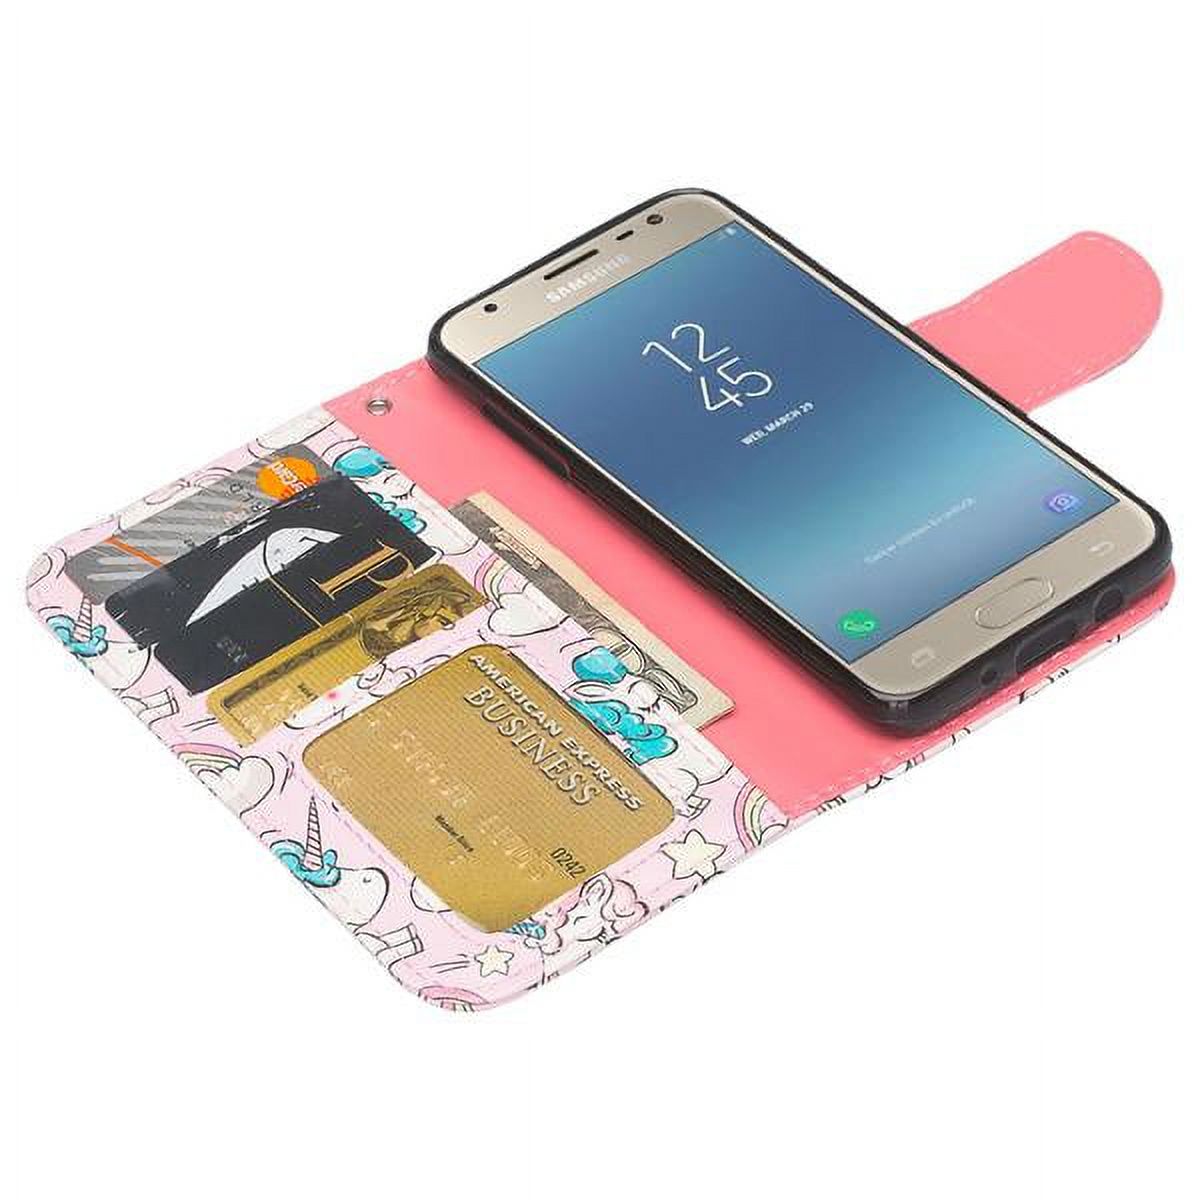 For Tracfone/StraightTalk For Samsung Galaxy J3 Orbit (S367VL) Case Pu Leather Flip Wallet Case [ID&Credit Card Slots] Phone Cases - Multi Unicorn - image 5 of 5